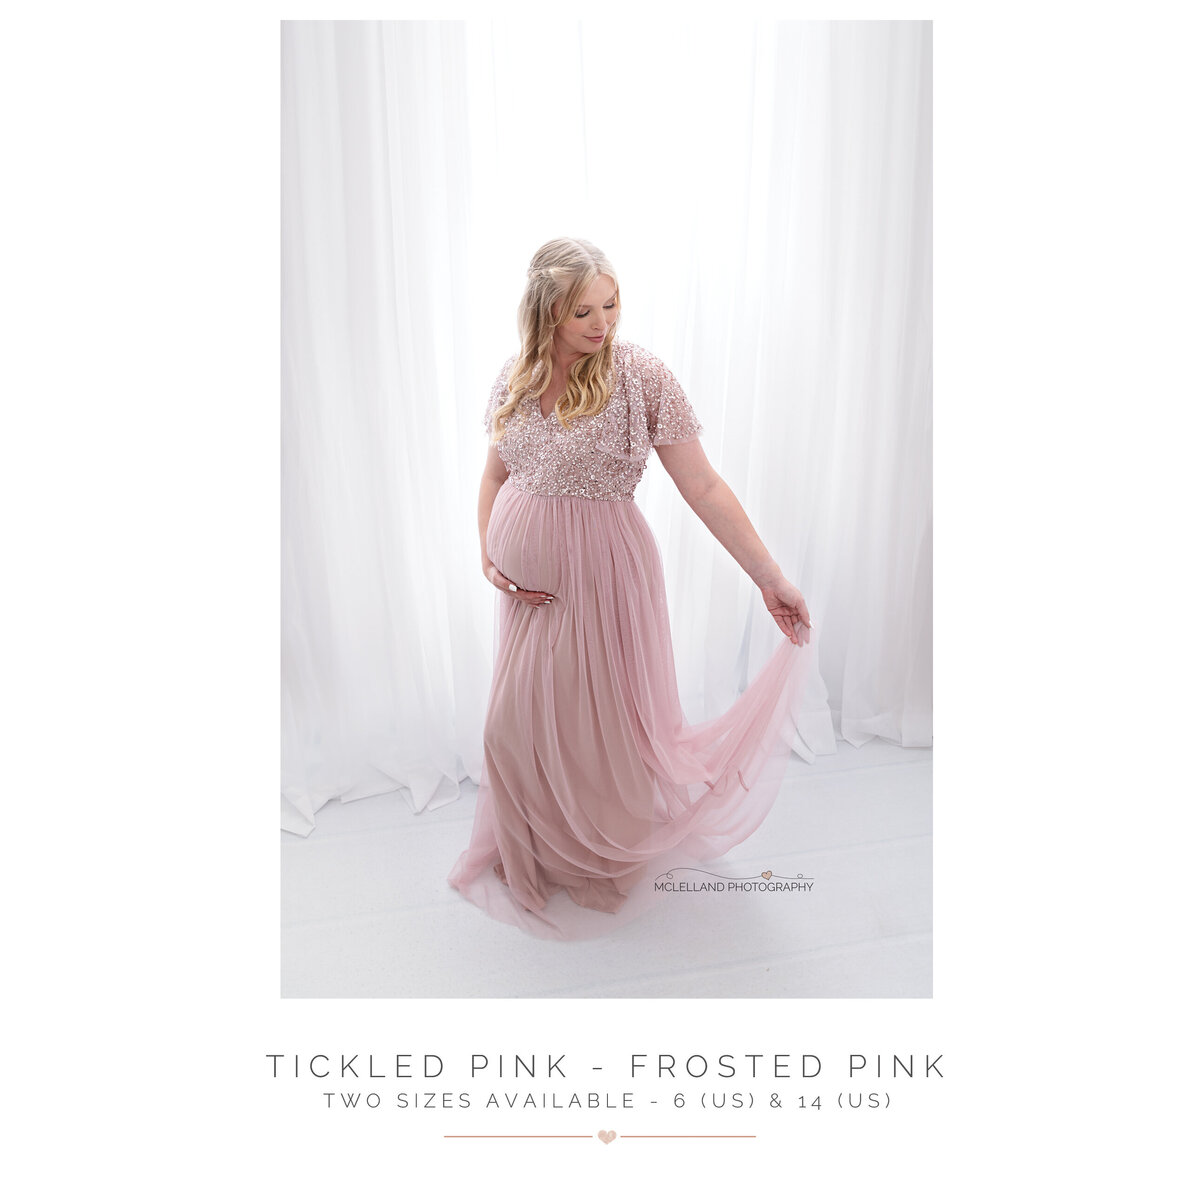 Tickled Pink - Frosted Pink